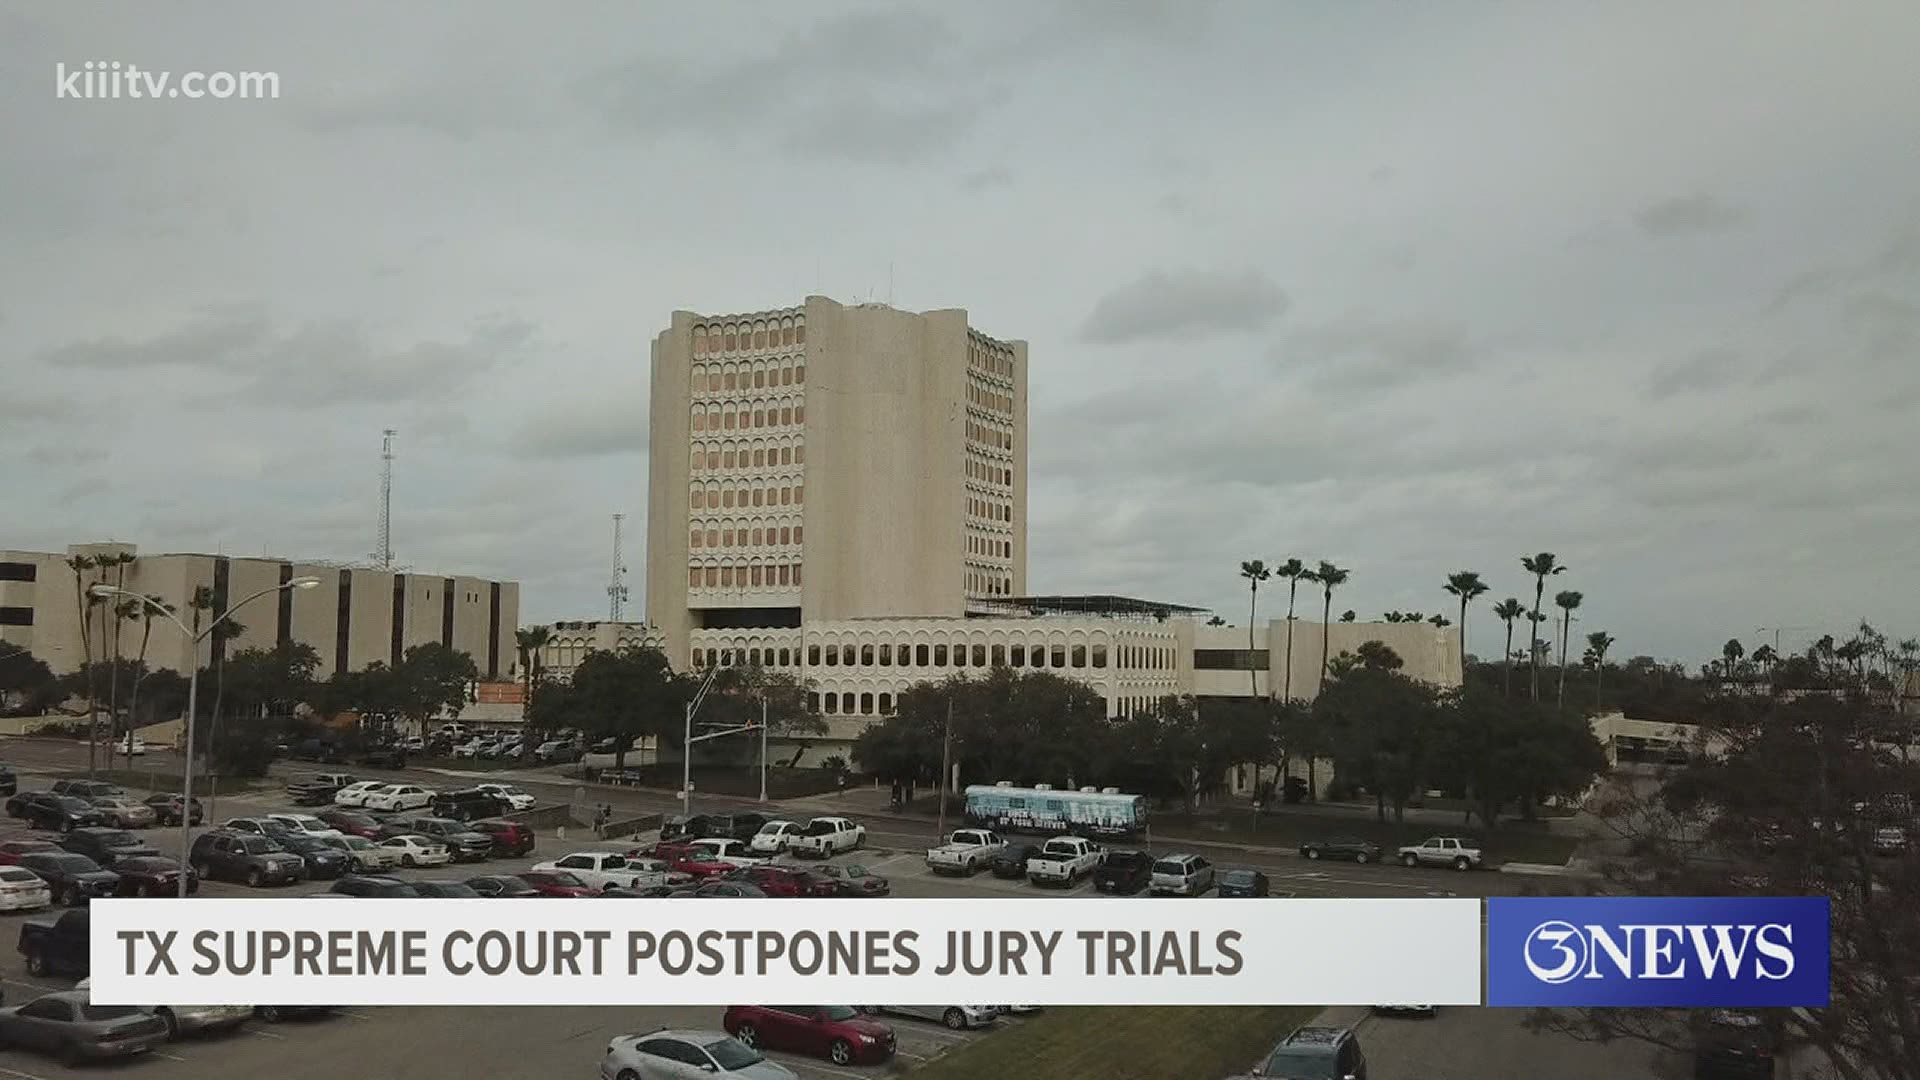 Jury trials across the the state are being pushed back after the Texas Supreme Court extended a previous order that postpones jury trials.